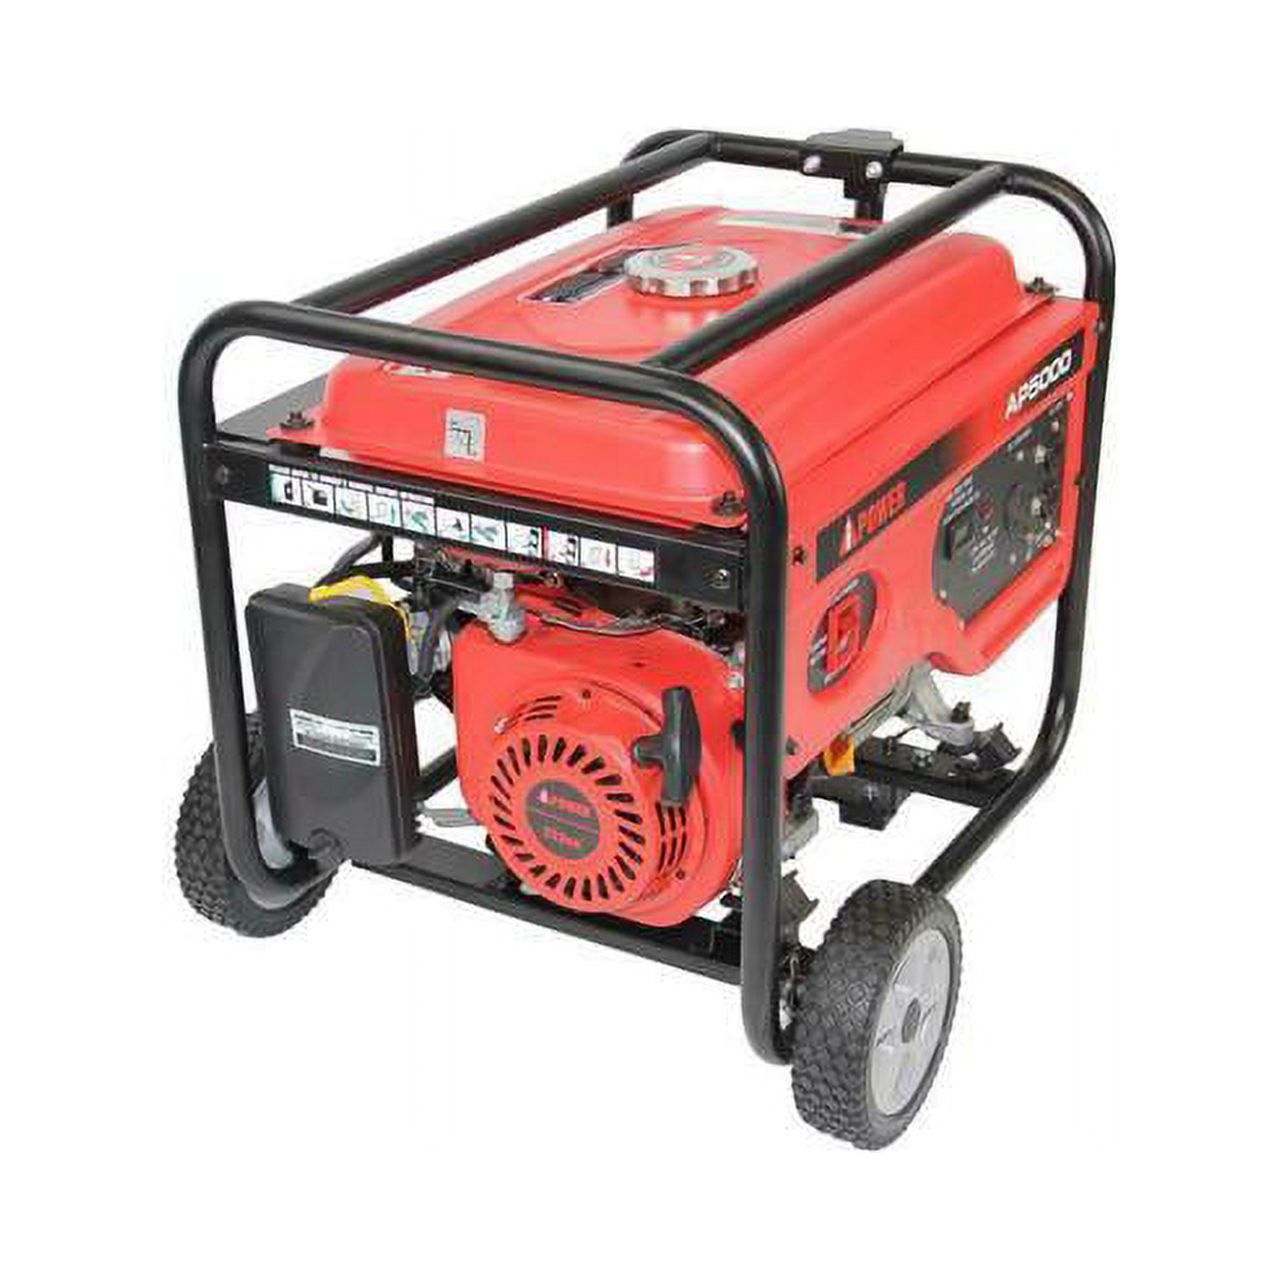 A-iPower AP5000 Gasoline Portable Generator W/ 5000W Starting Watts - image 4 of 5